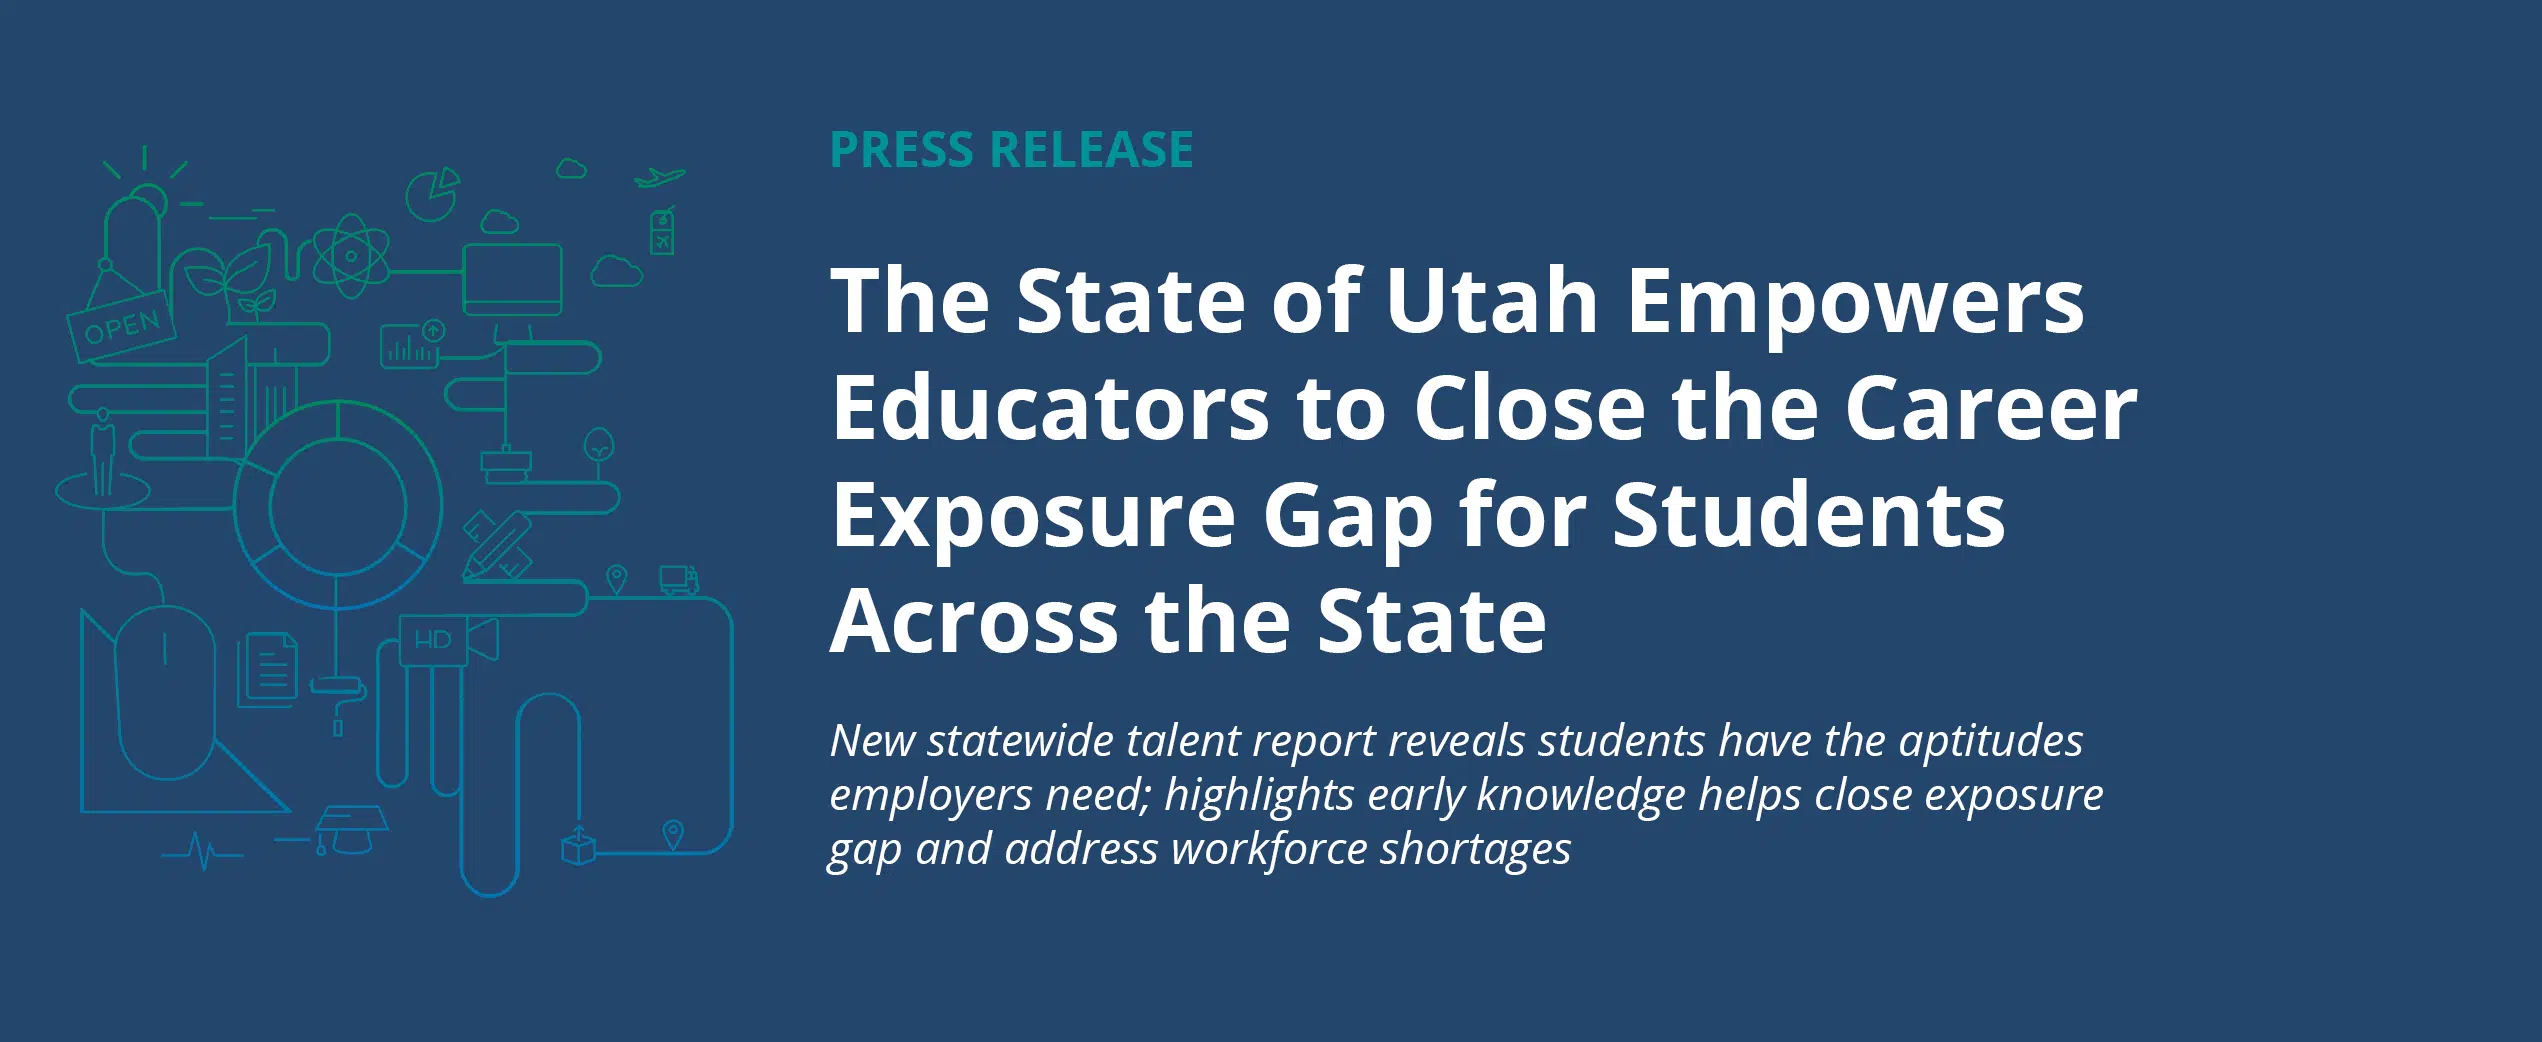 The State of Utah Empowers Educators to Close the Career Exposure Gap for Students Across the State